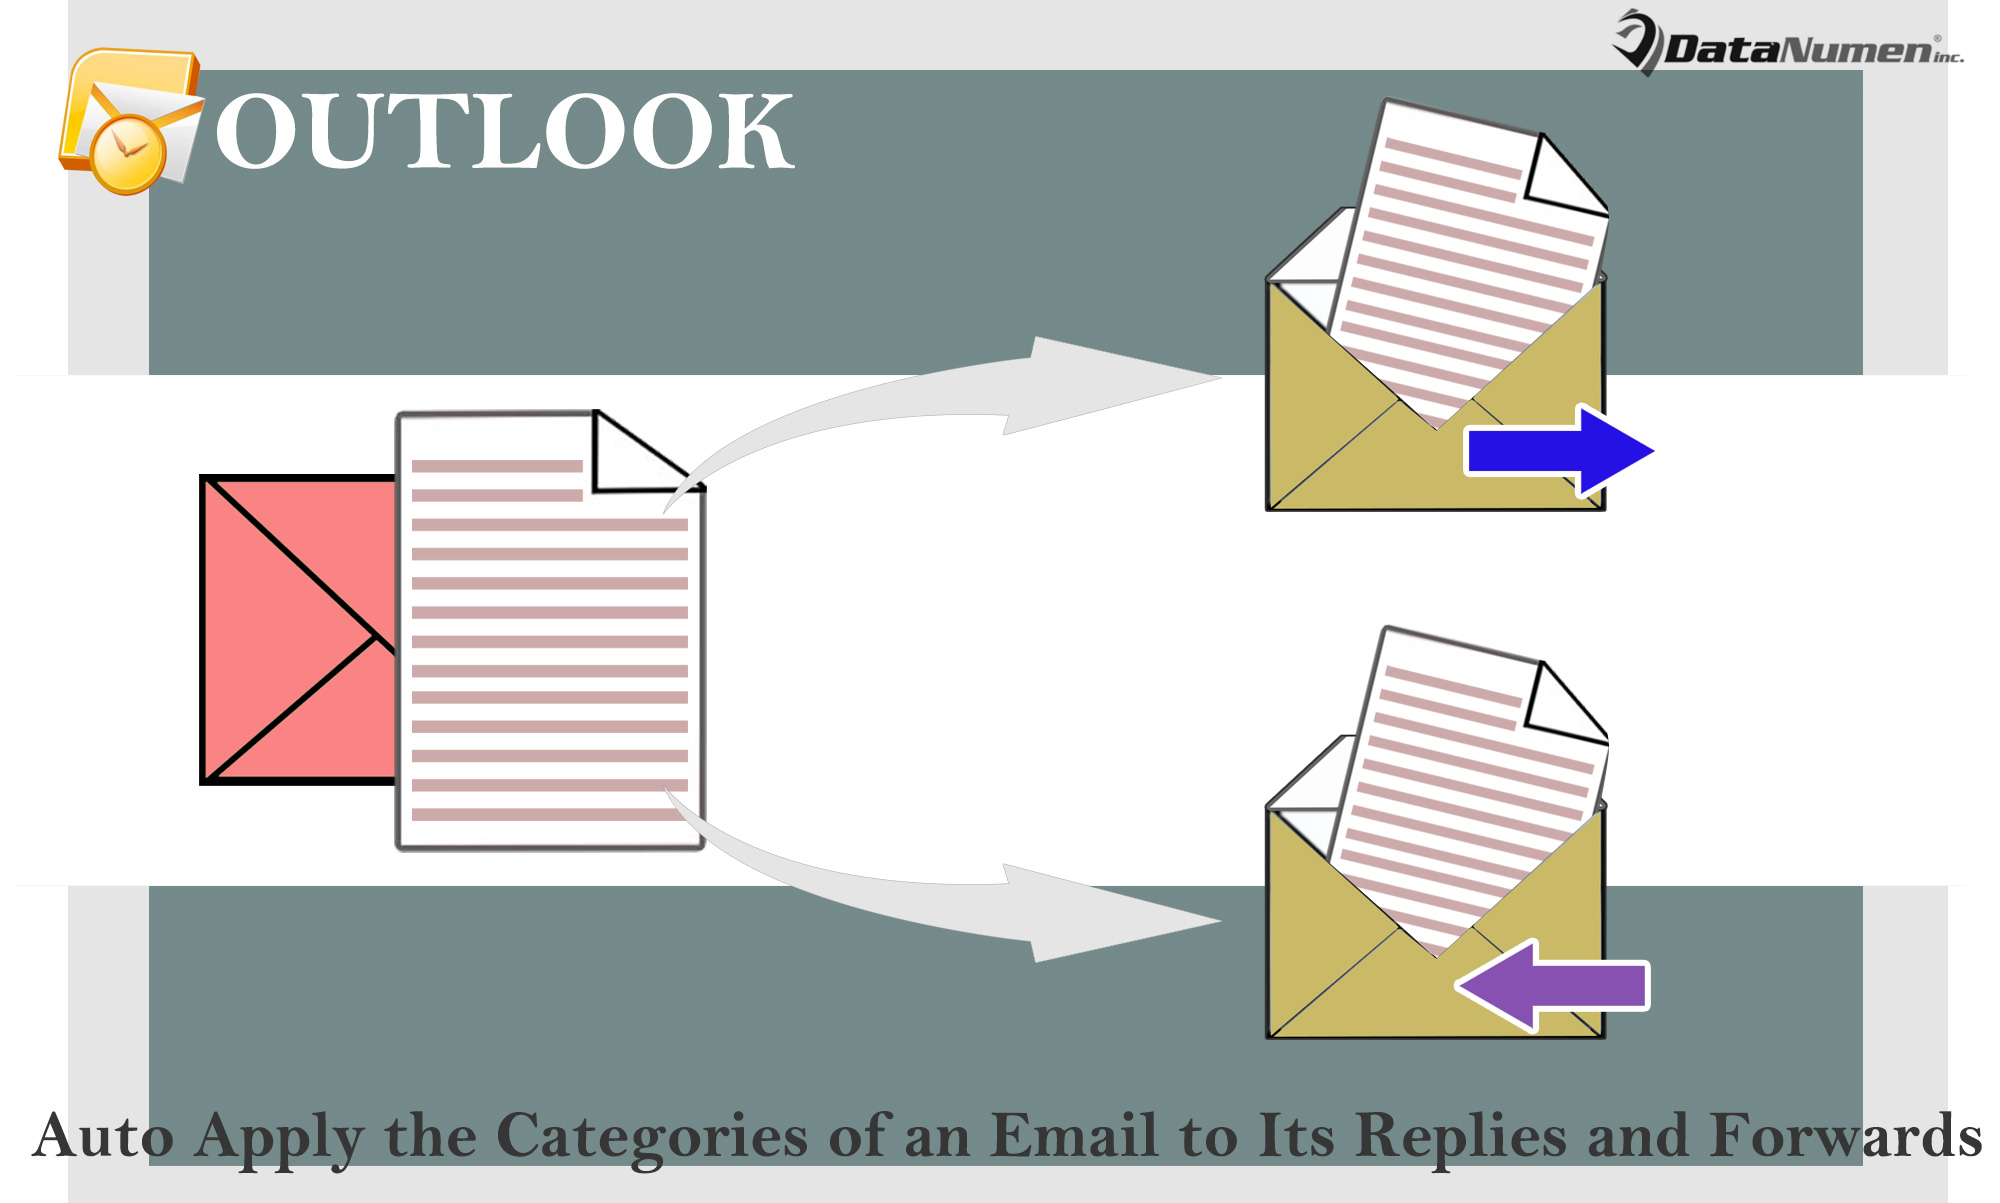 Auto Apply the Categories of an Email to All Its Replies and Forwards in Outlook